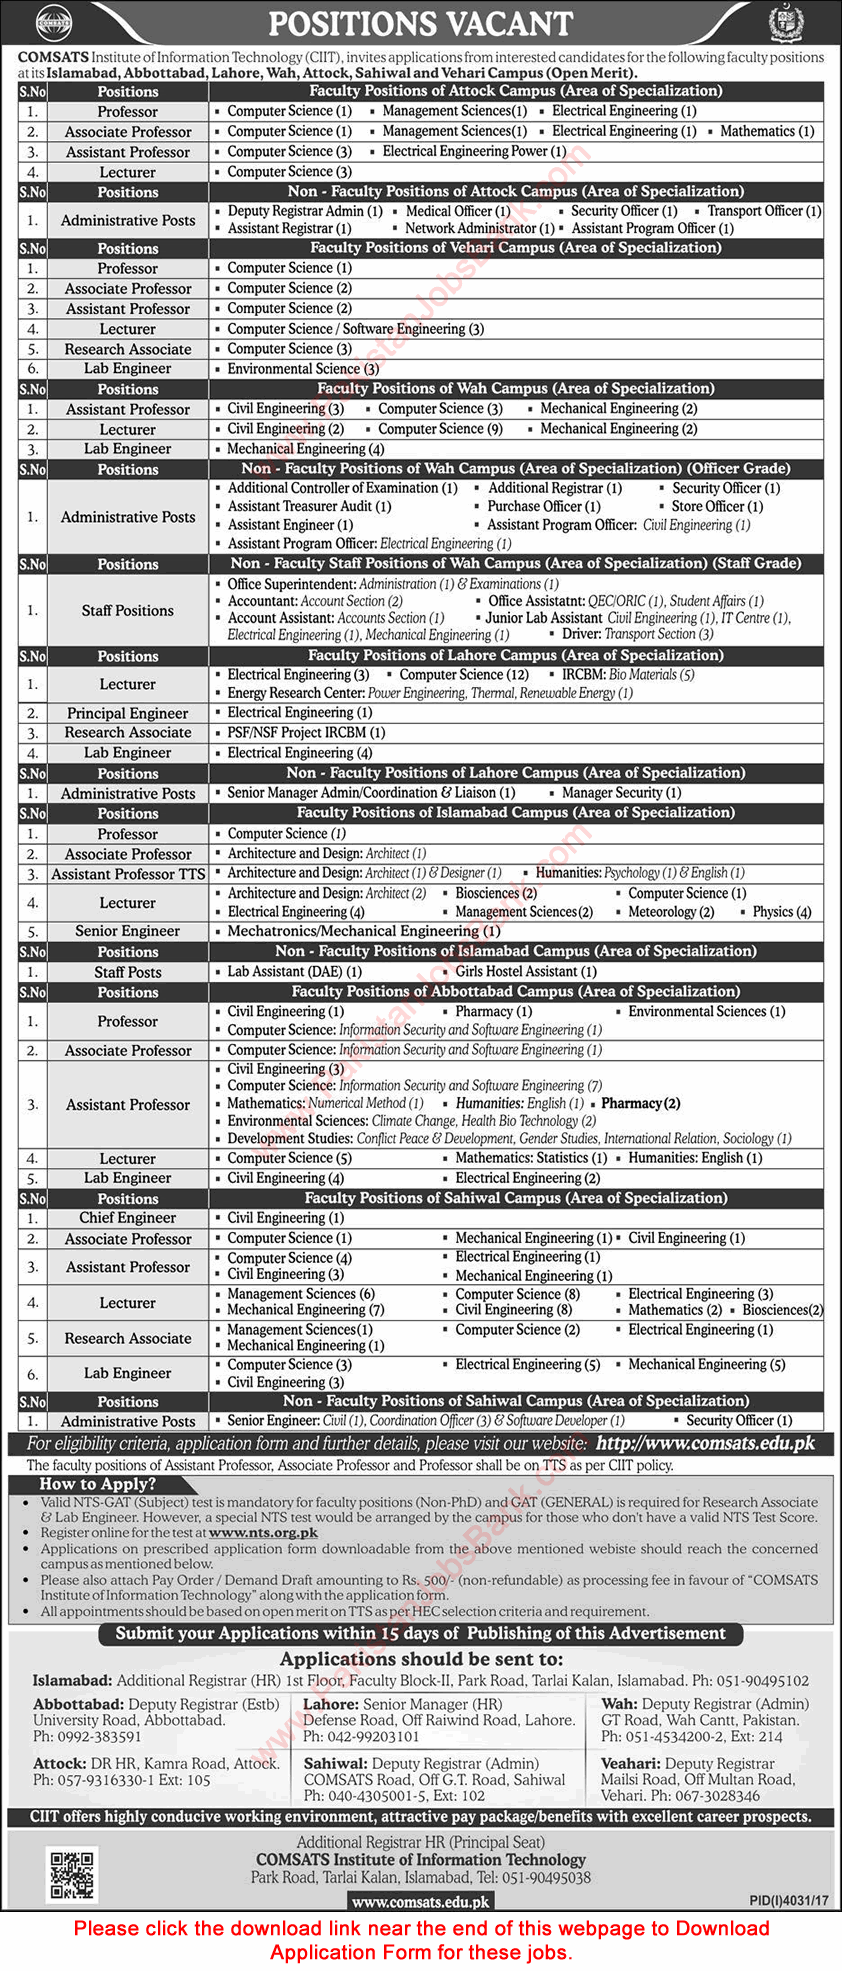 COMSATS Jobs 2018 January CIIT Application Form Teaching Faculty, Lab Engineer & Admin Staff Latest